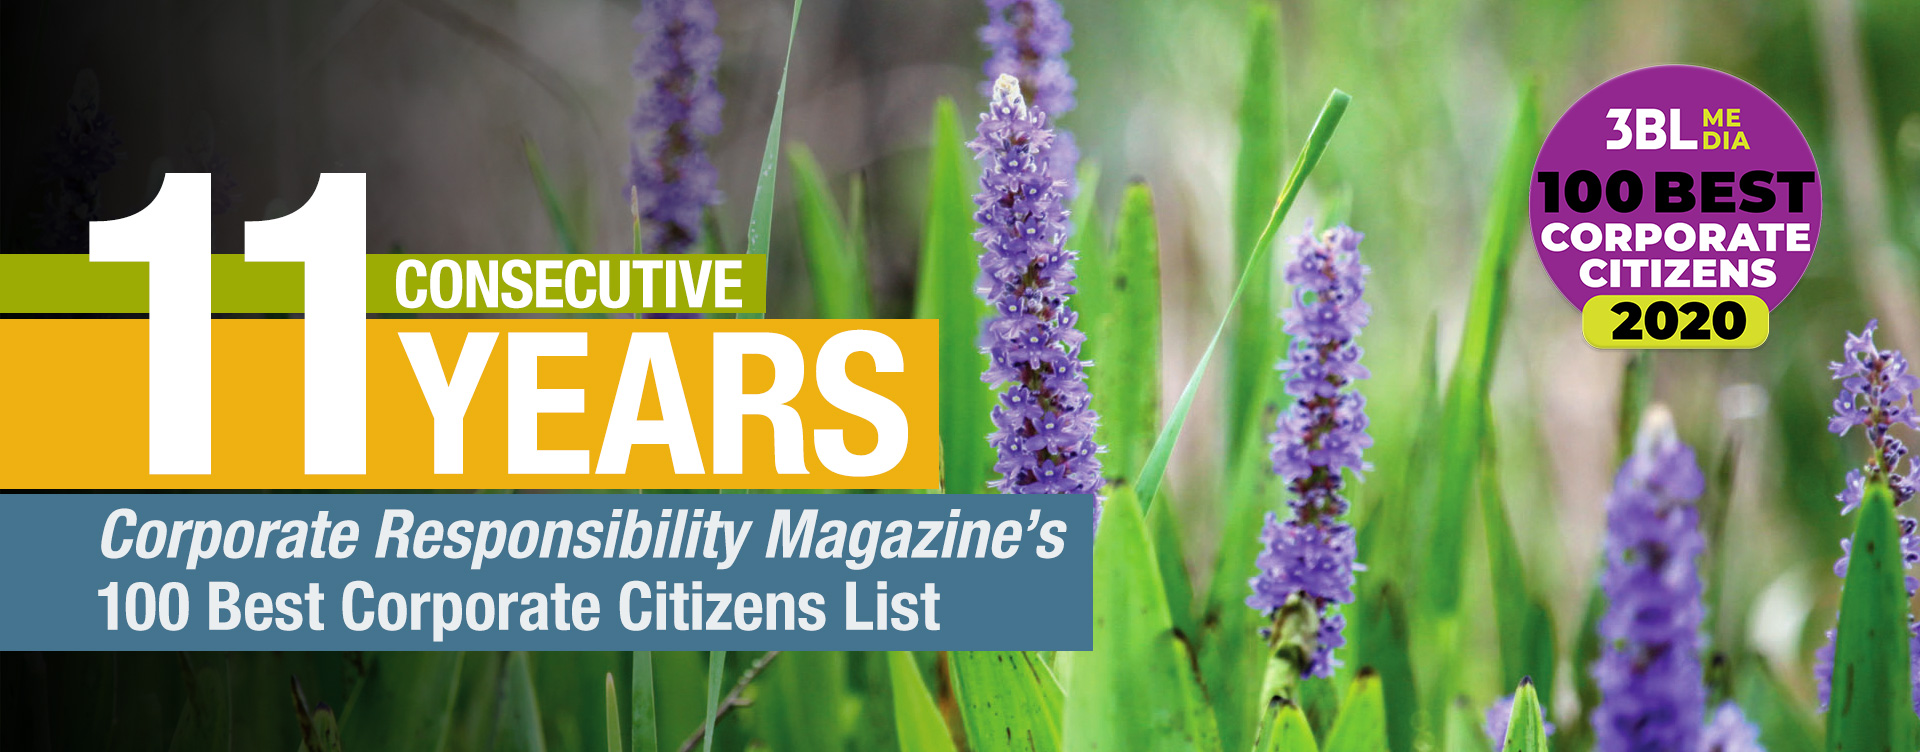 11 consecutive years on Corporate Responsibility Magazine's 100 Best Corporate Citizens List